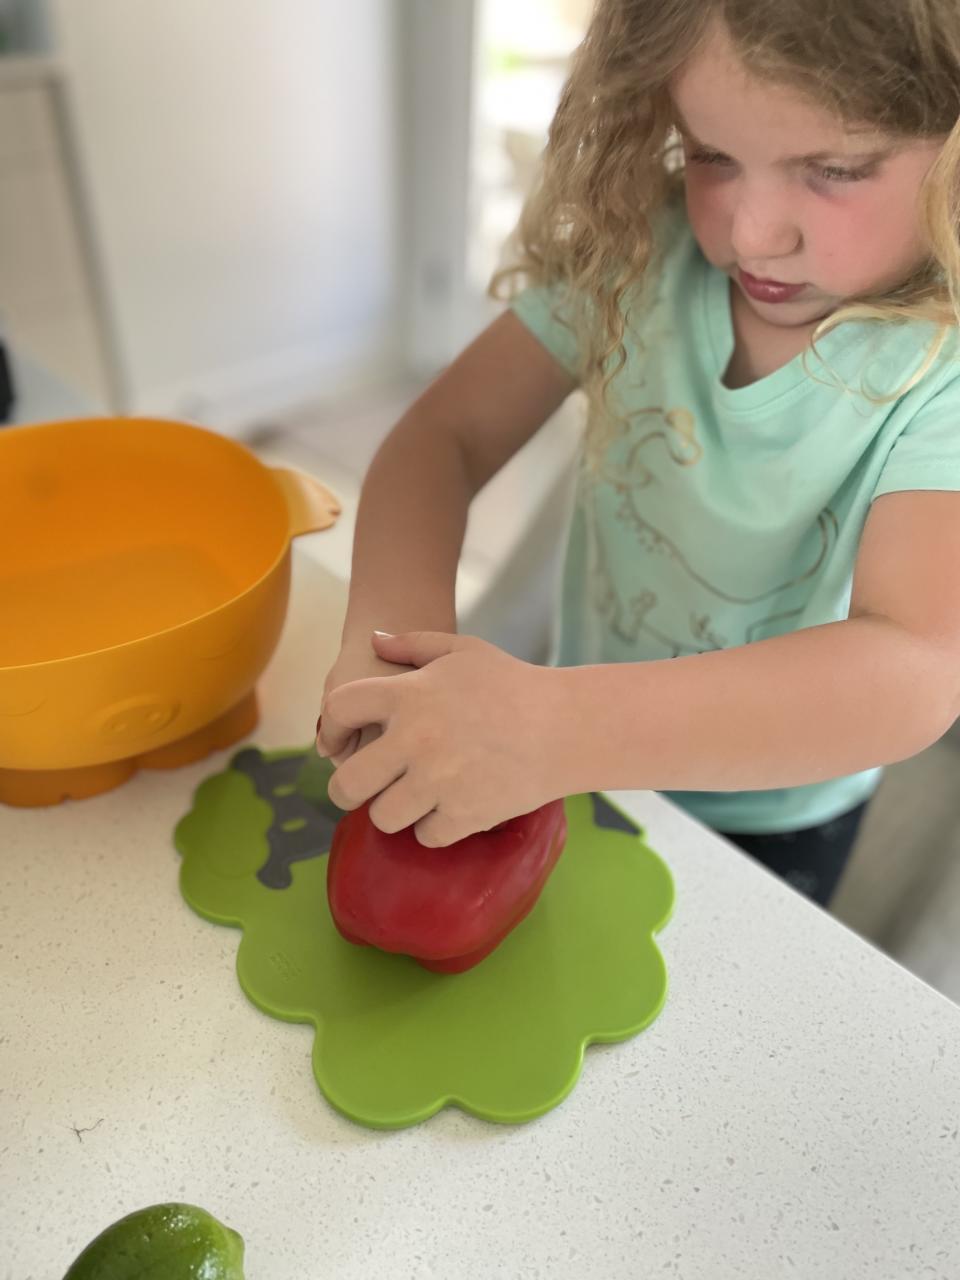 The author's daughter cutting a bell pepper